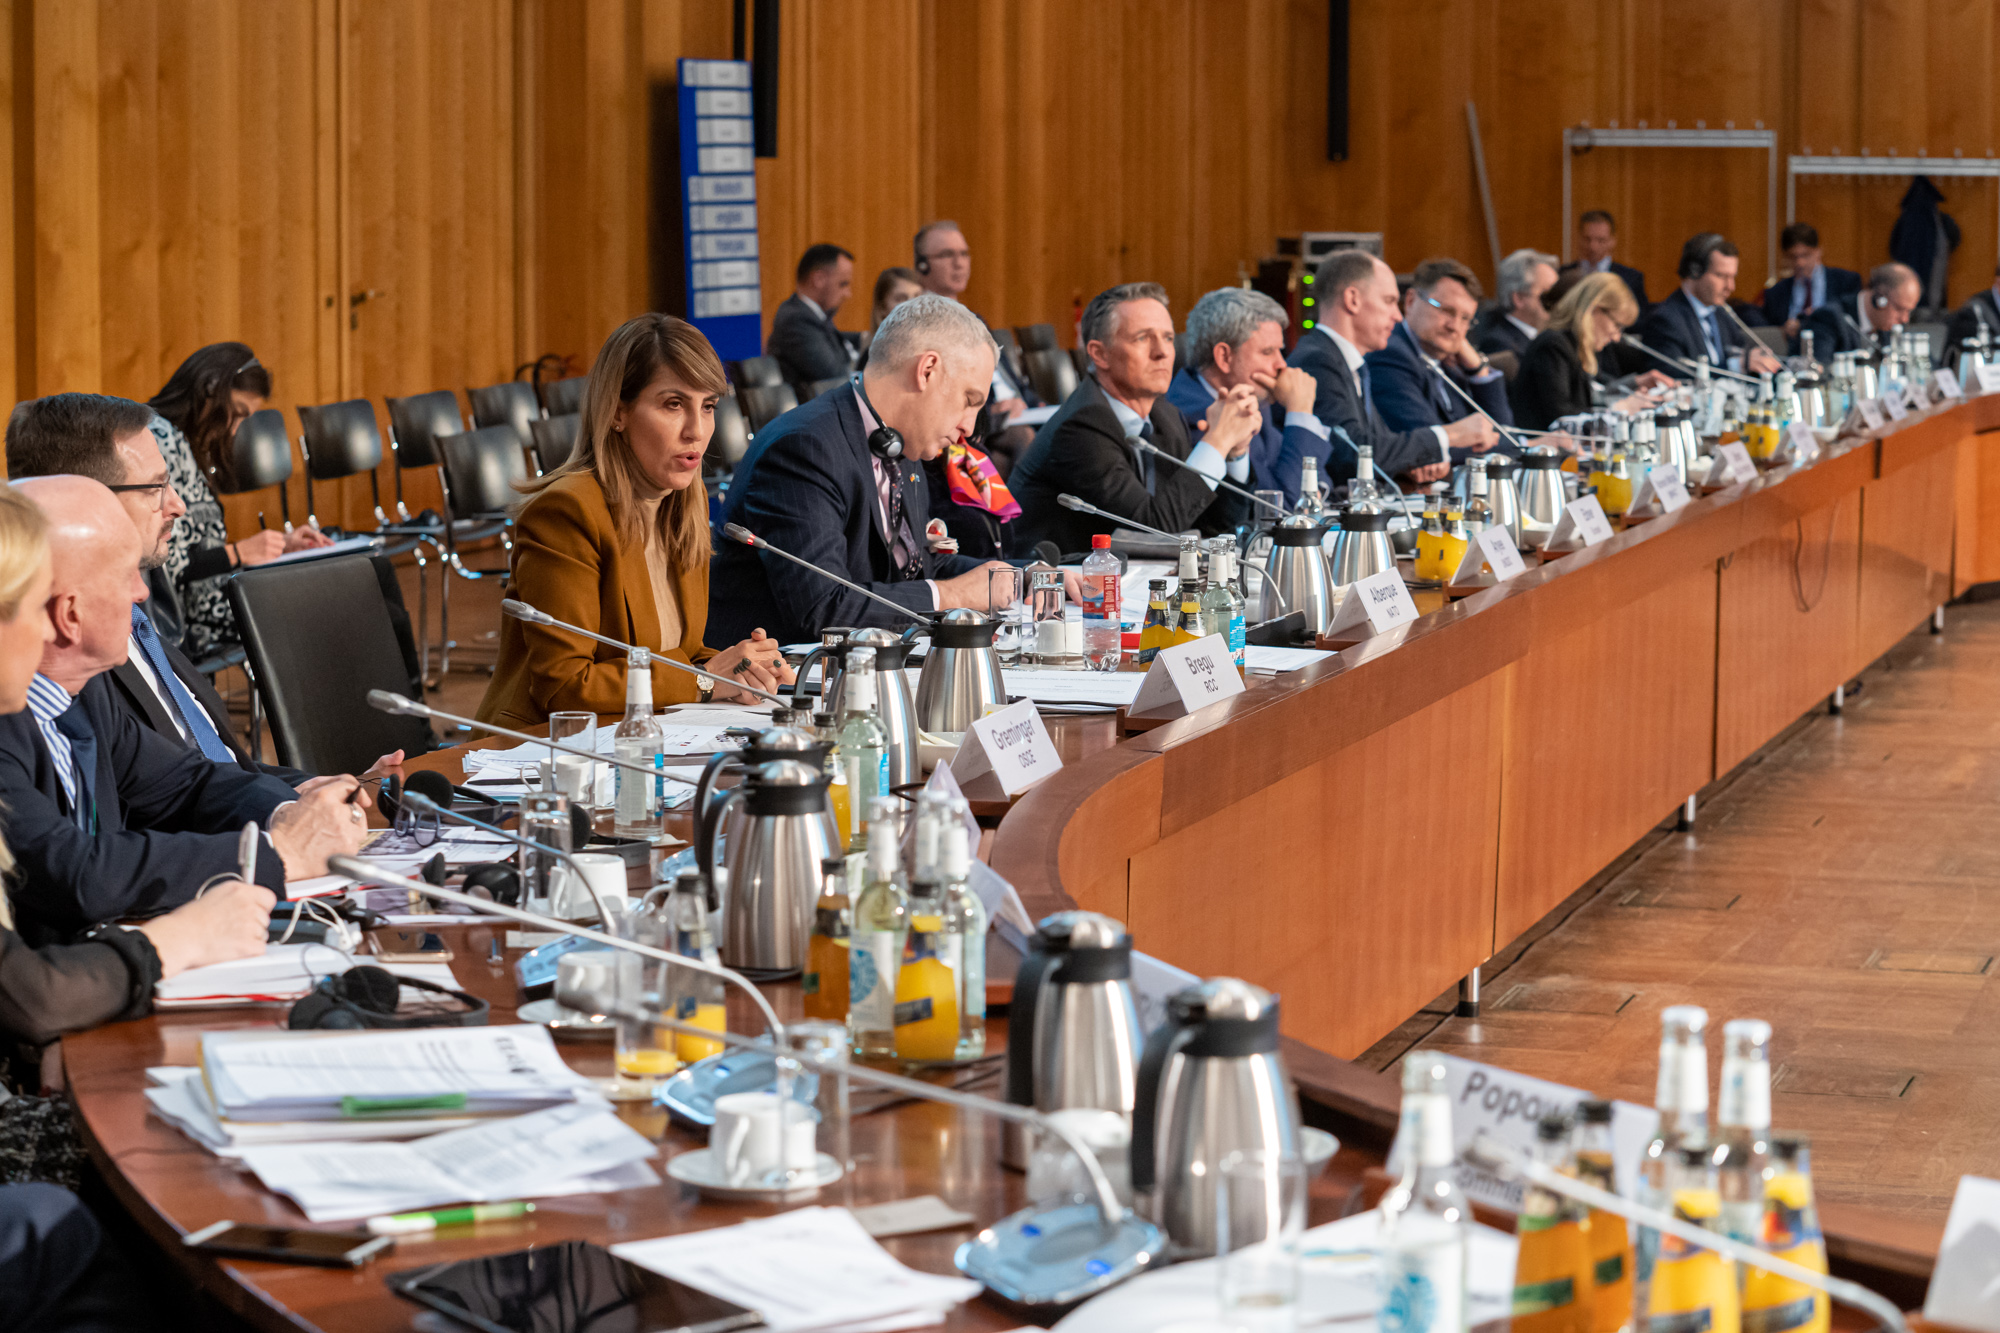 Majlinda Bregu, Secretary General of the Regional Cooperation Council (RCC) speaking at the high-level meeting on the implementation of the Roadmap for comprehensive SALW in the Western Balkans in Berlin on 31 January 2020 (Photo: RCC/David Beercroft)